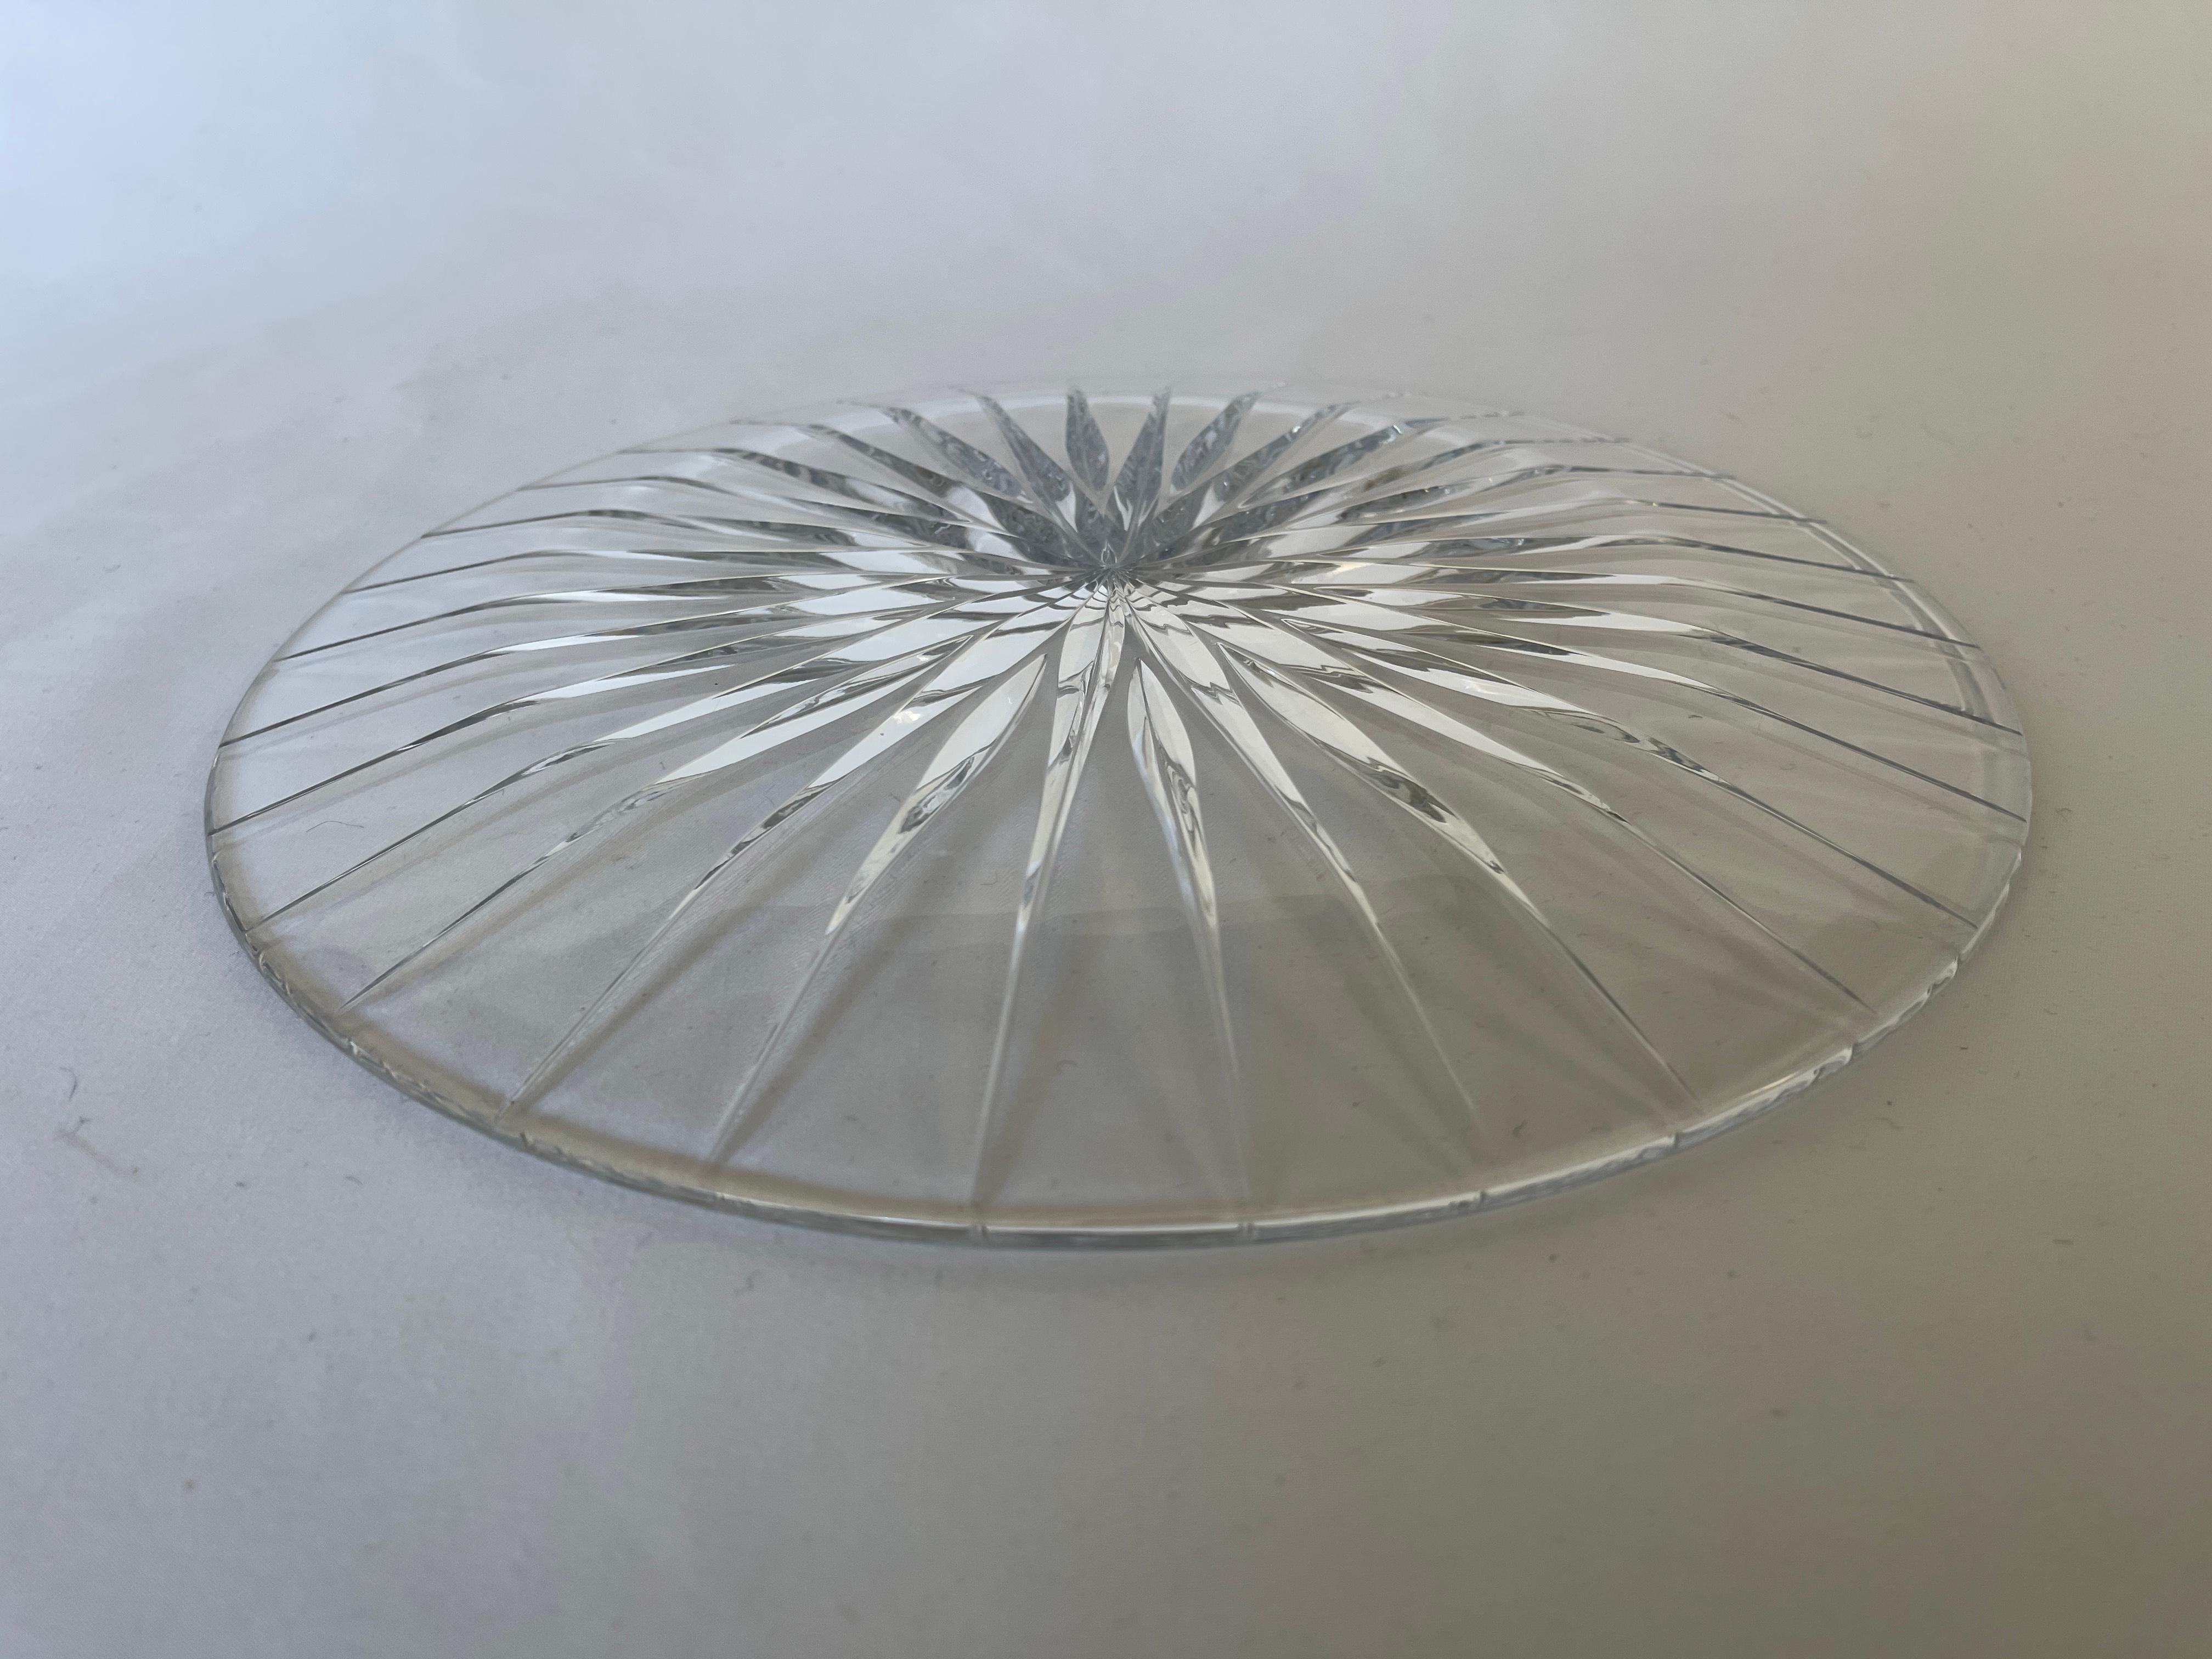 Large Sunburst Design Cut Glass Starburst Round Serving Platter Plate In Good Condition For Sale In New York, NY